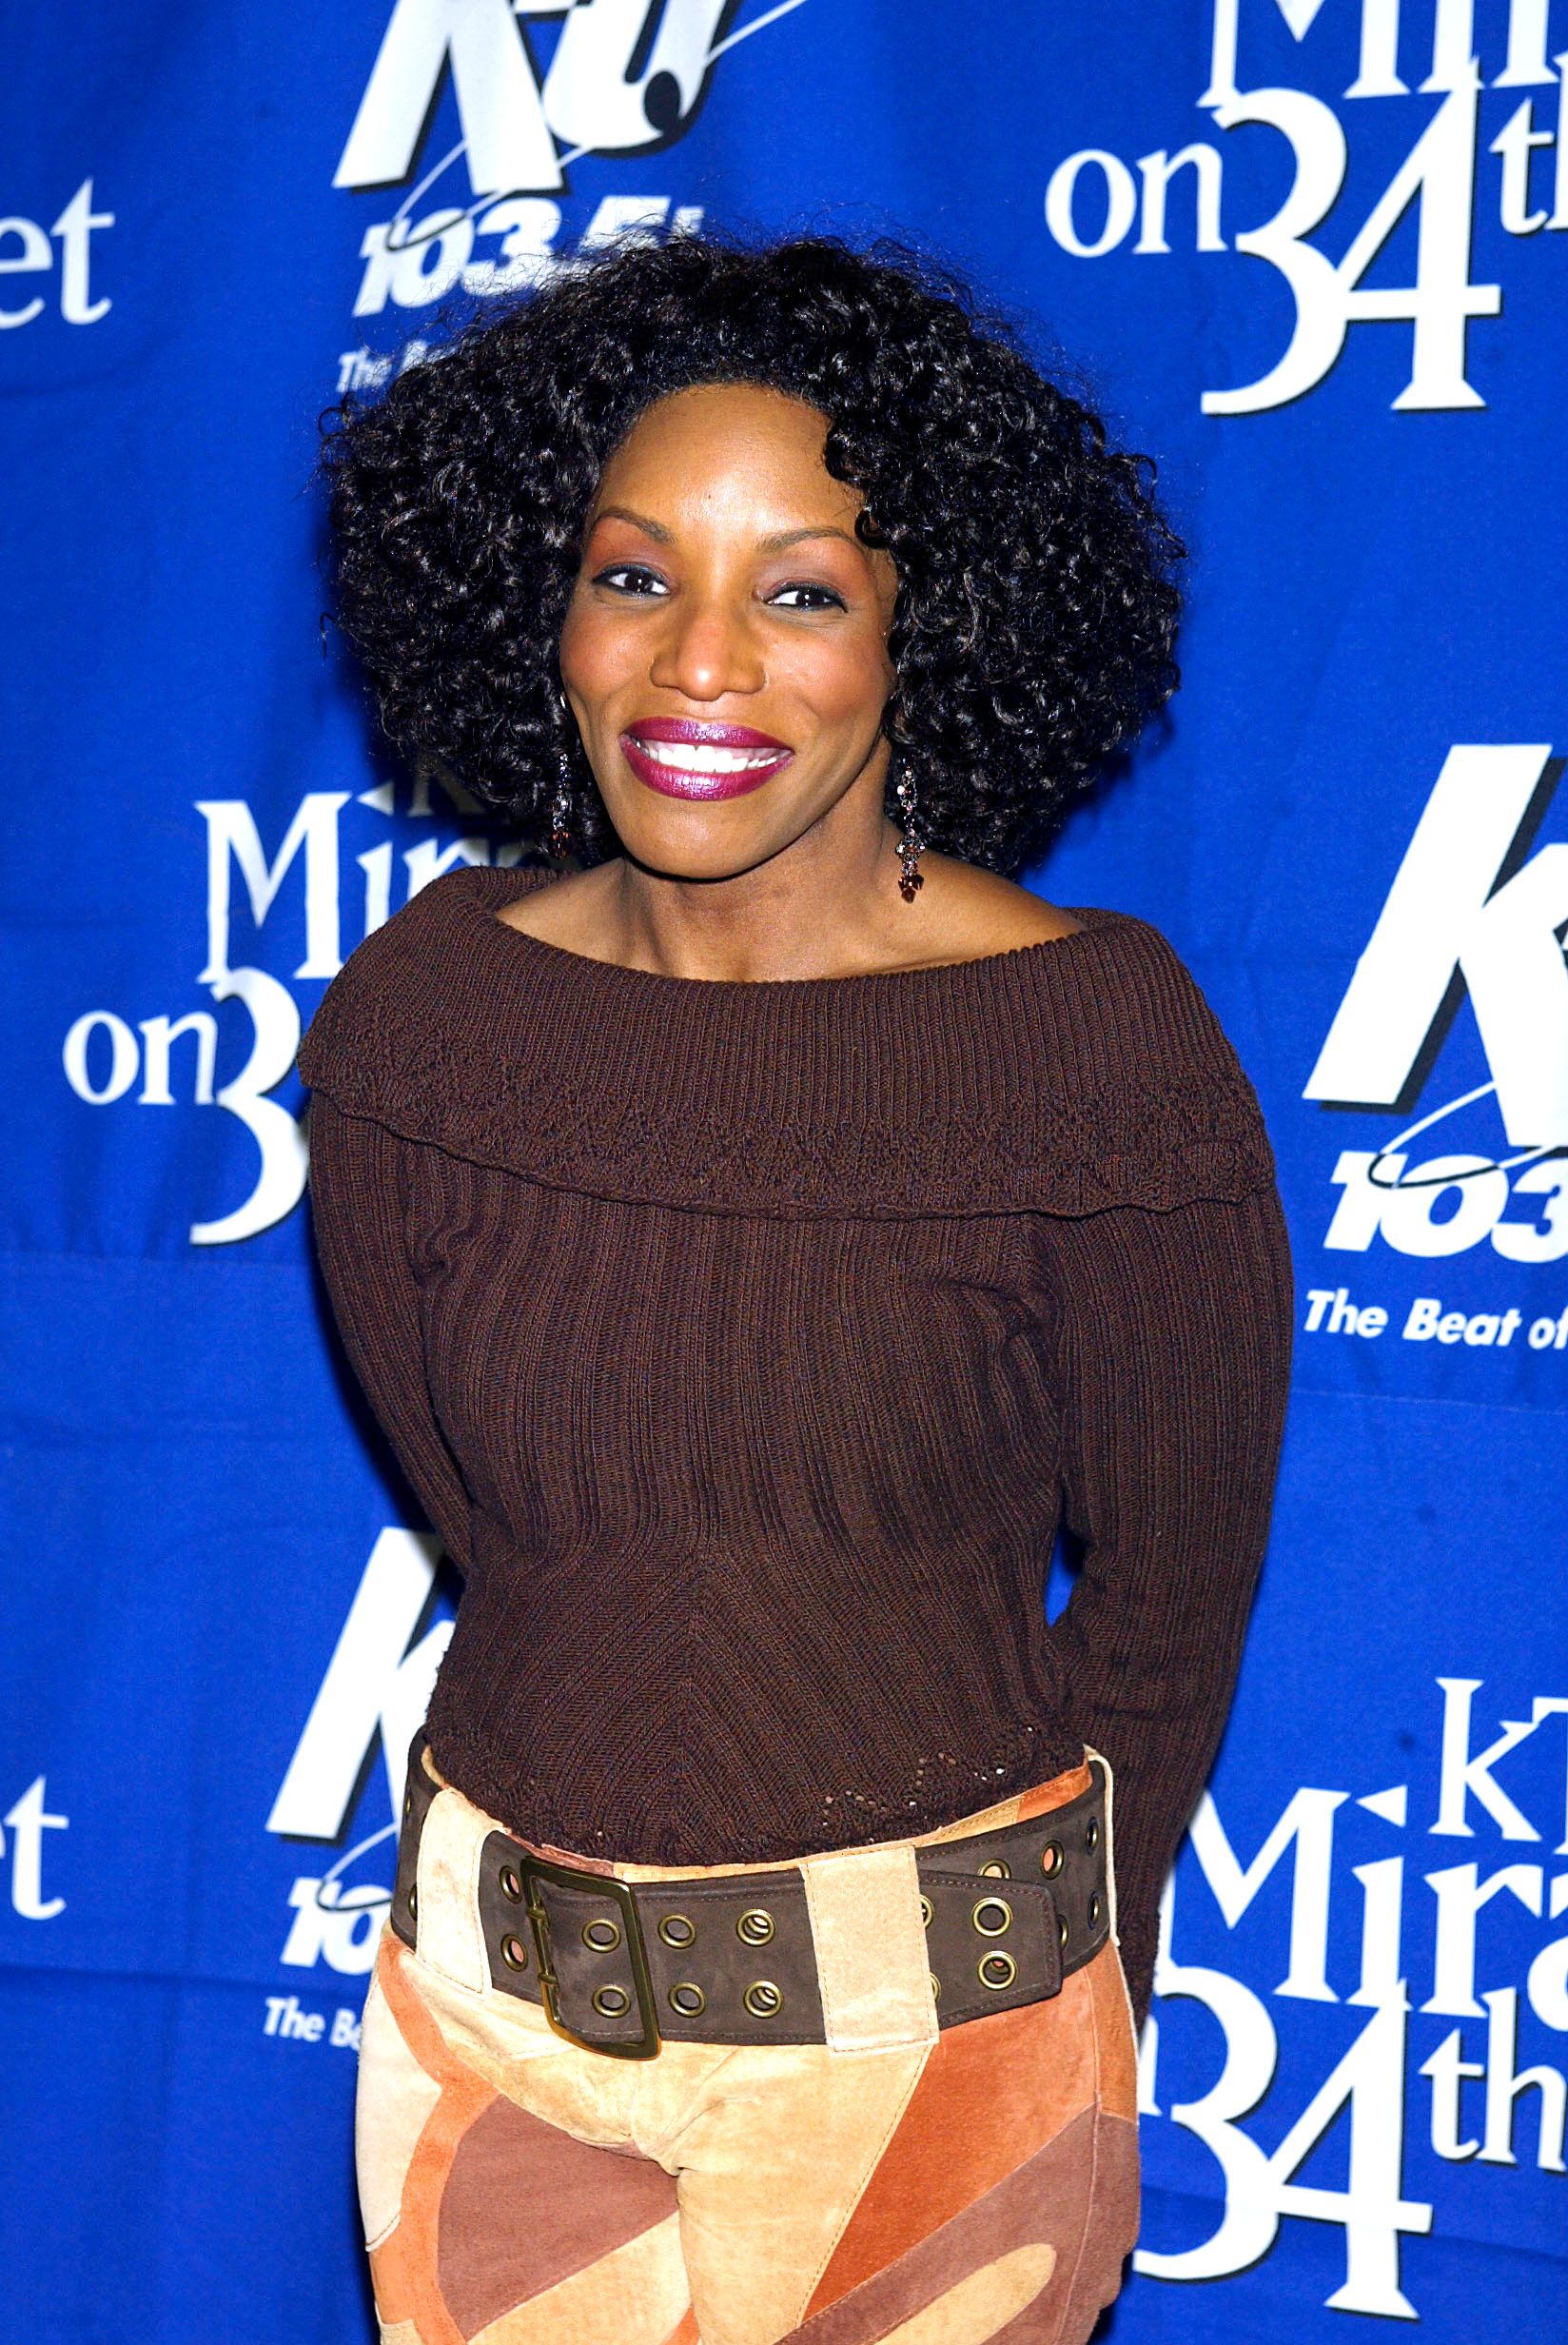 Stephanie Mills during "KTU's Miracle on 34th Street" hoilday concert at Madison Square Garden in New York City, on December 18, 2002. | Source: Getty Images